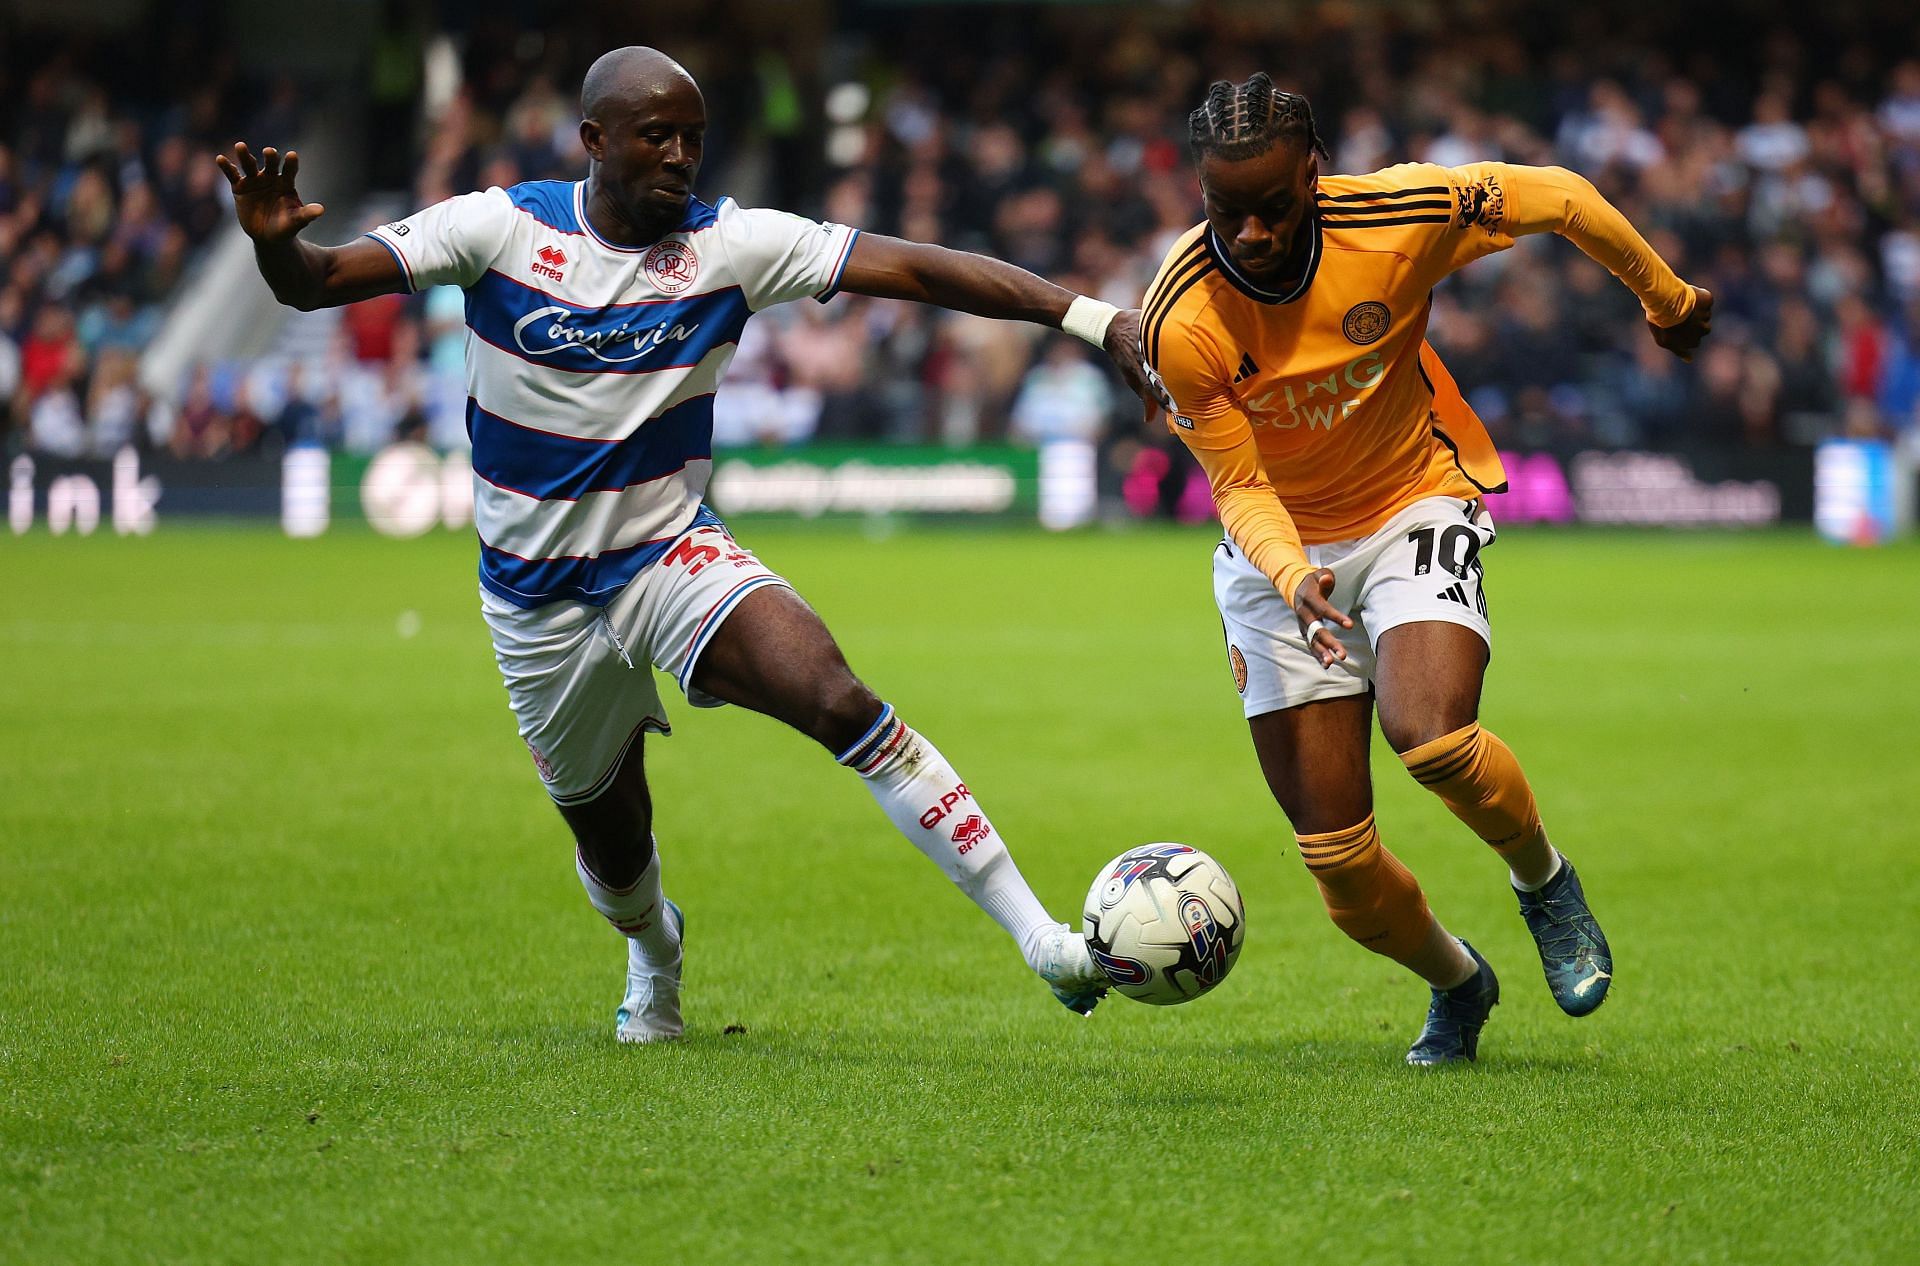 Queens Park Rangers v Leicester City - Sky Bet Championship